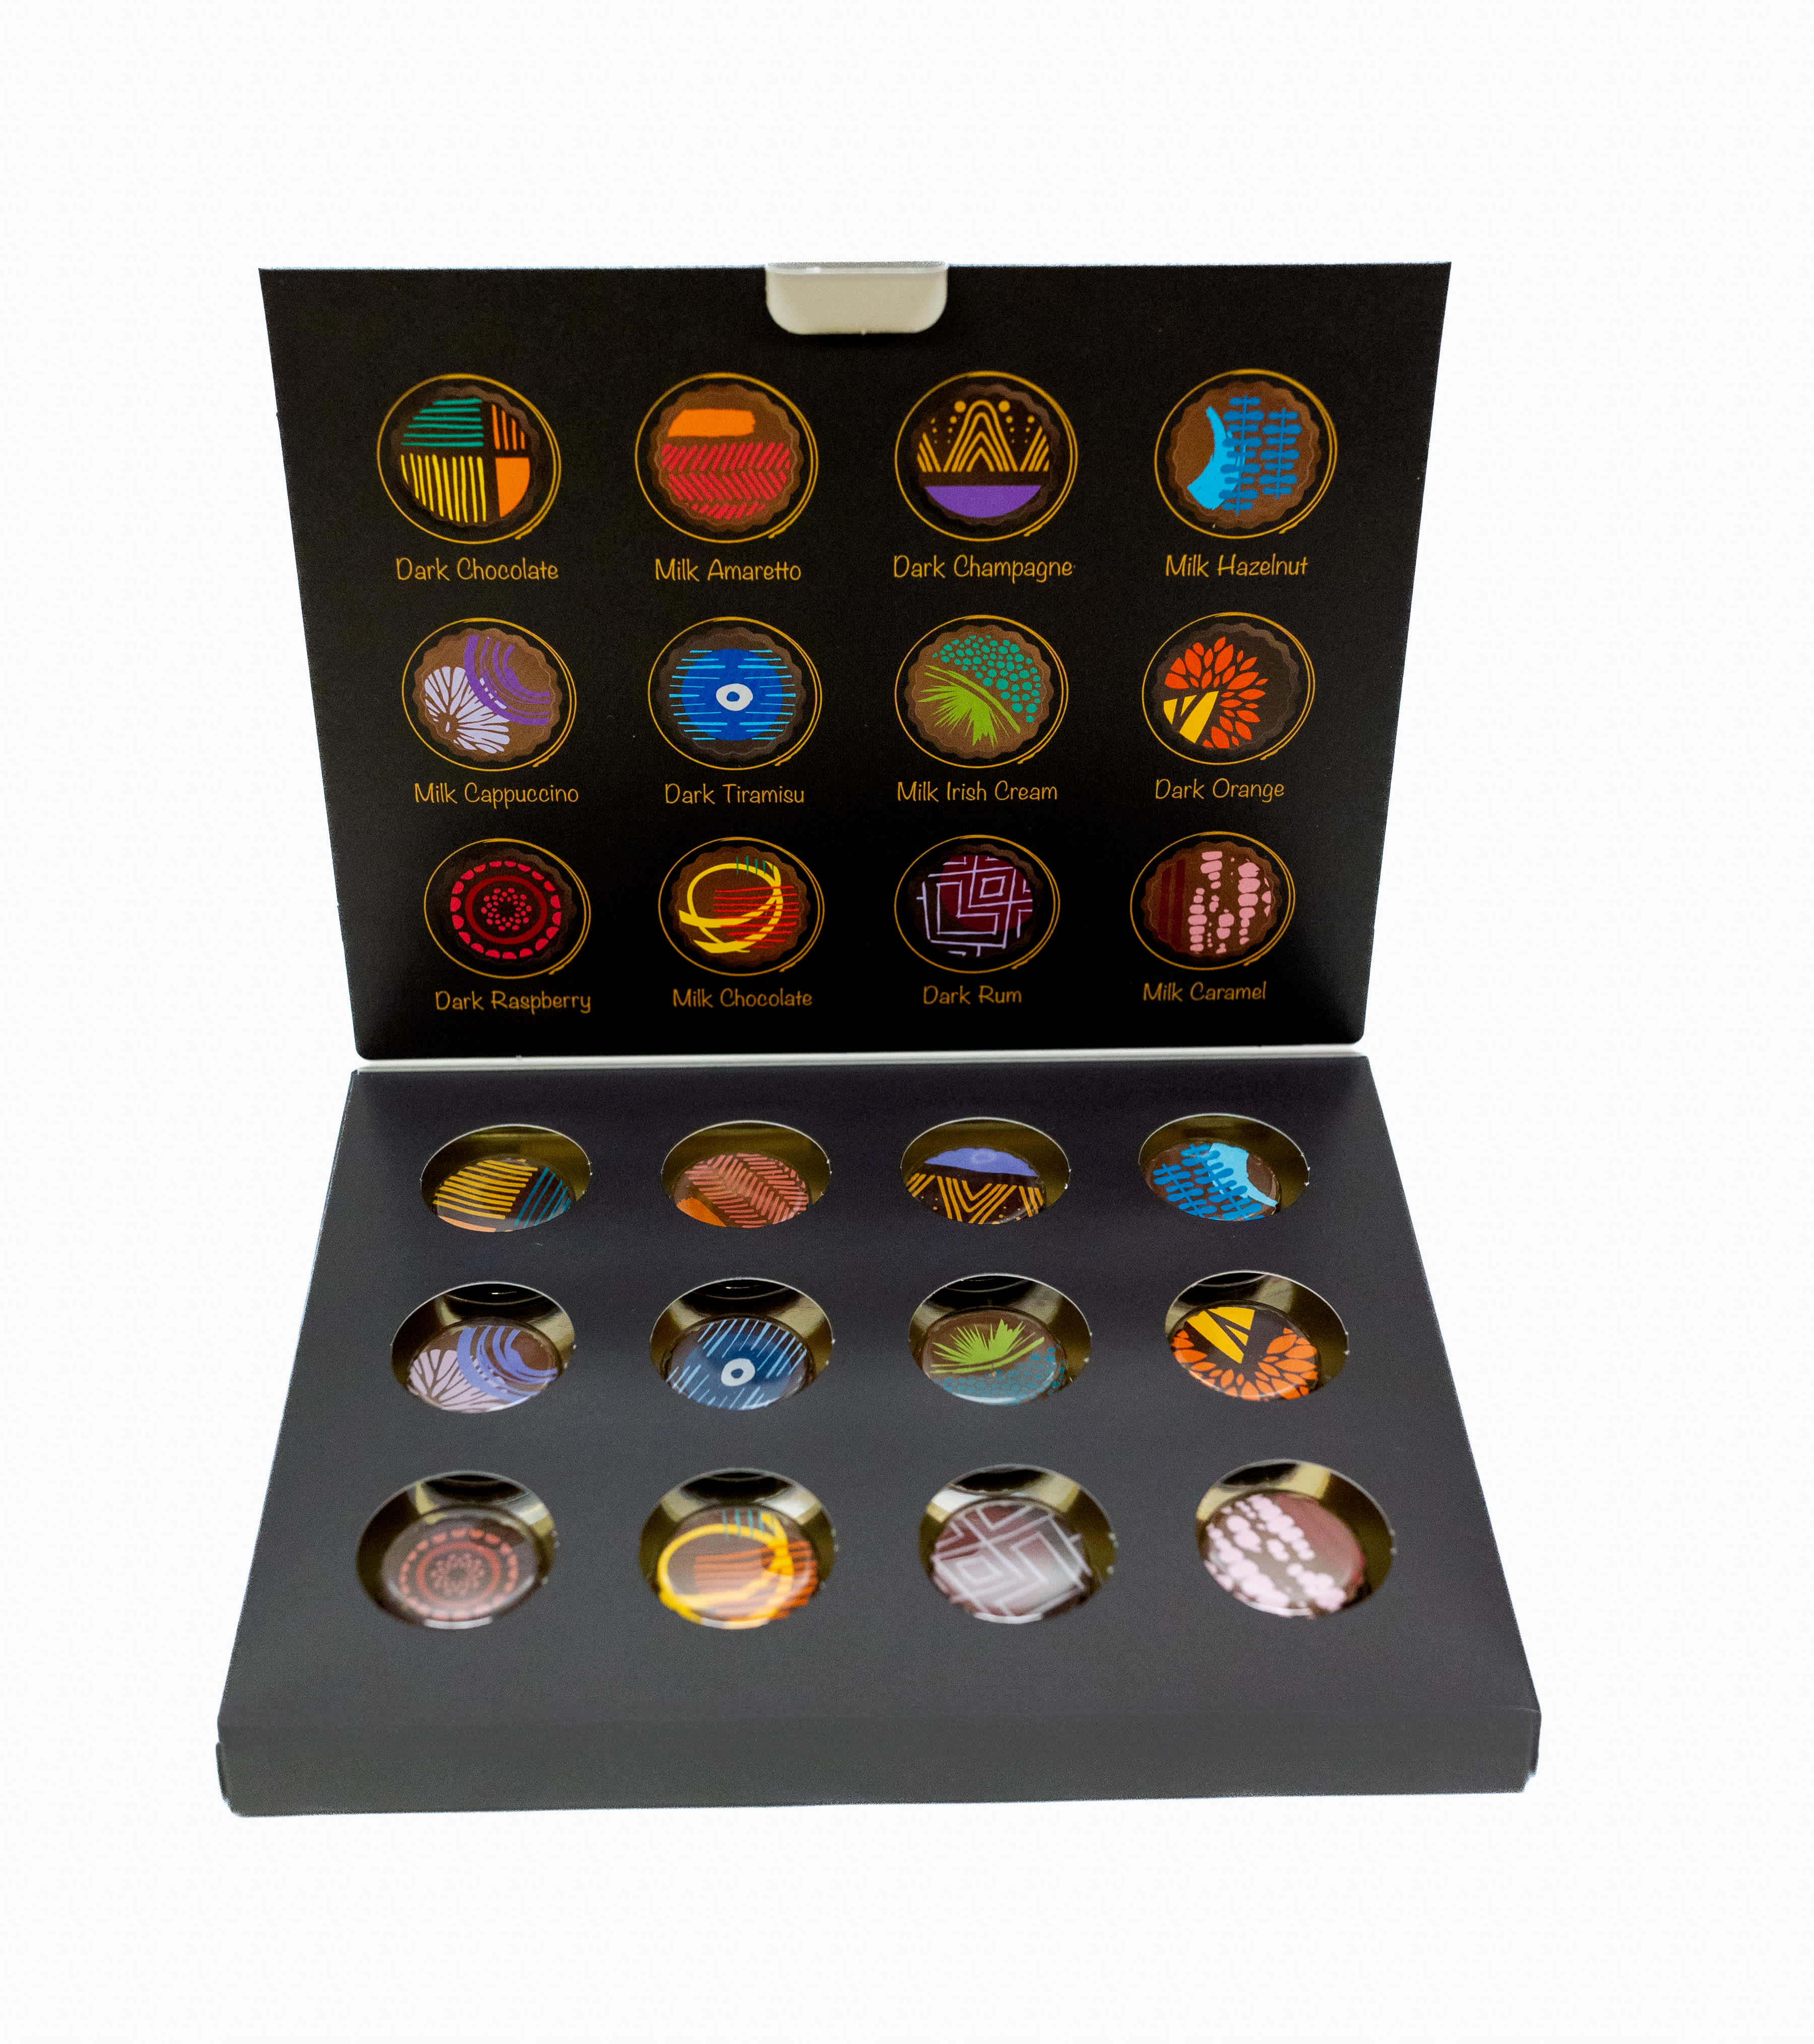 12 PIECE ARTISIAN TRUFFLES - These beautiful artisan truffle designs provide a feast for the eyes even before their chocolate goodness becomes a feast for you!  Contains a variety of everyone's favorite flavors